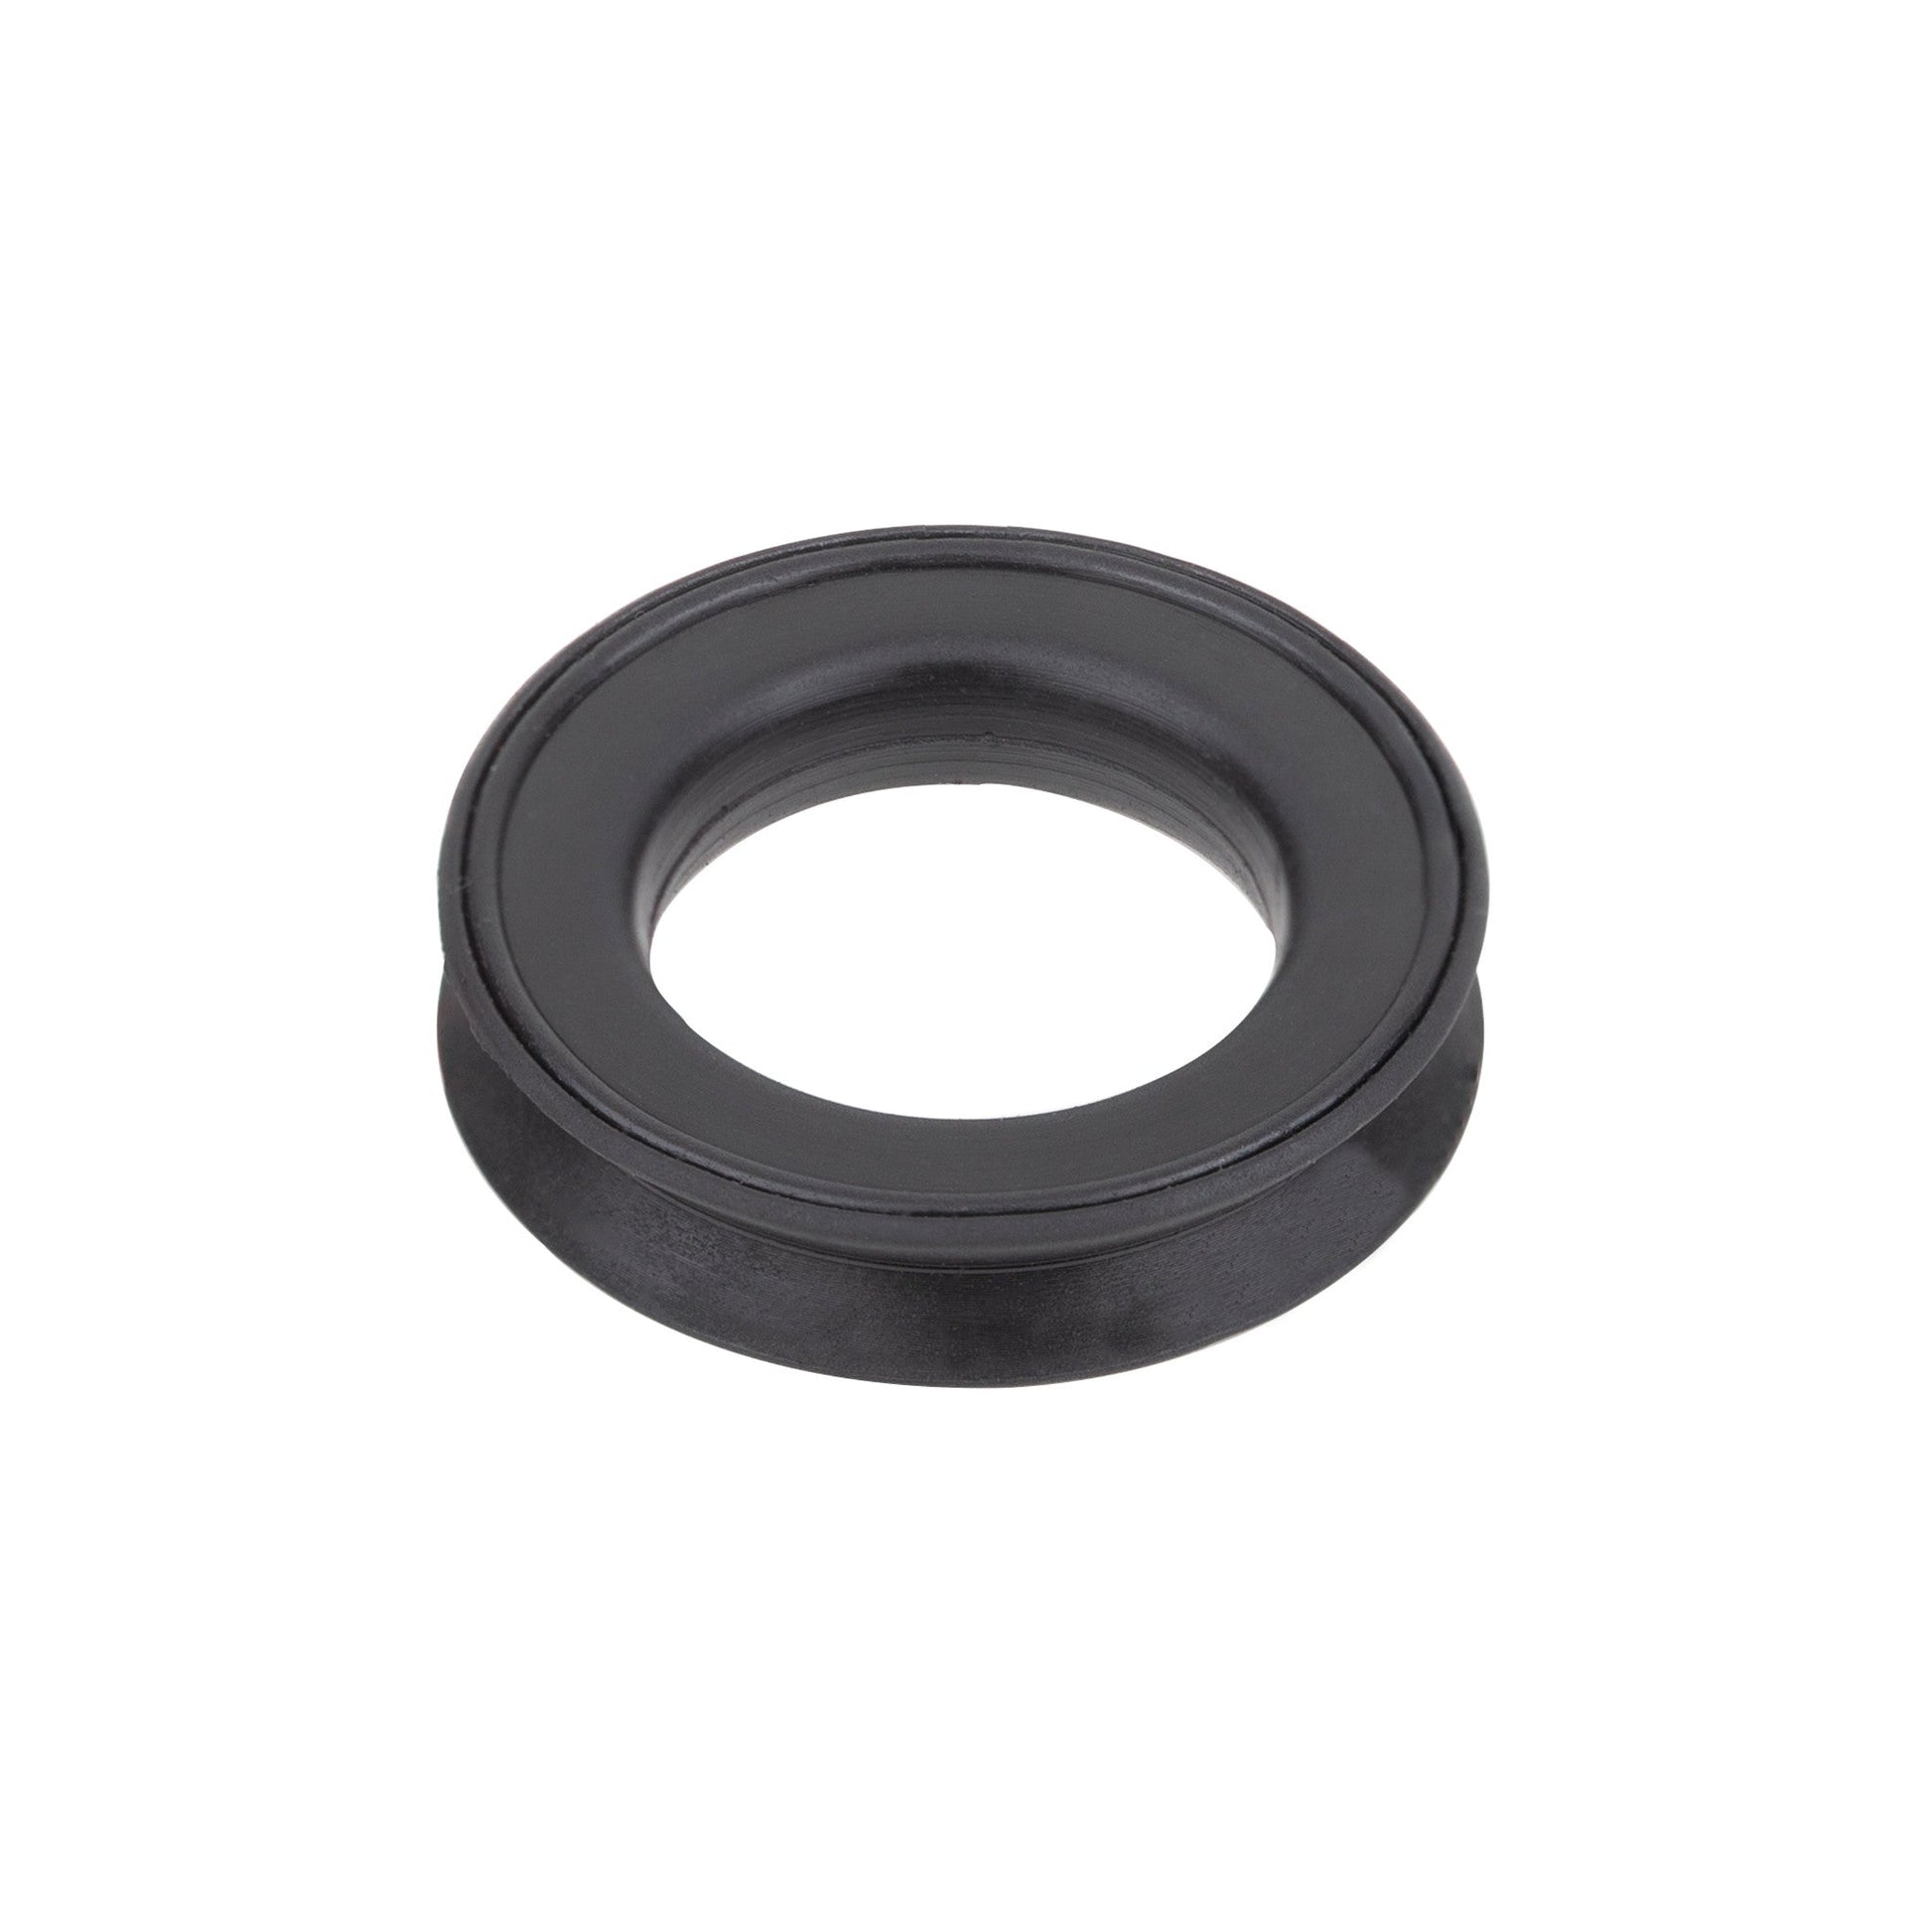 Toyota 5VZFE fuel injector o-ring seal